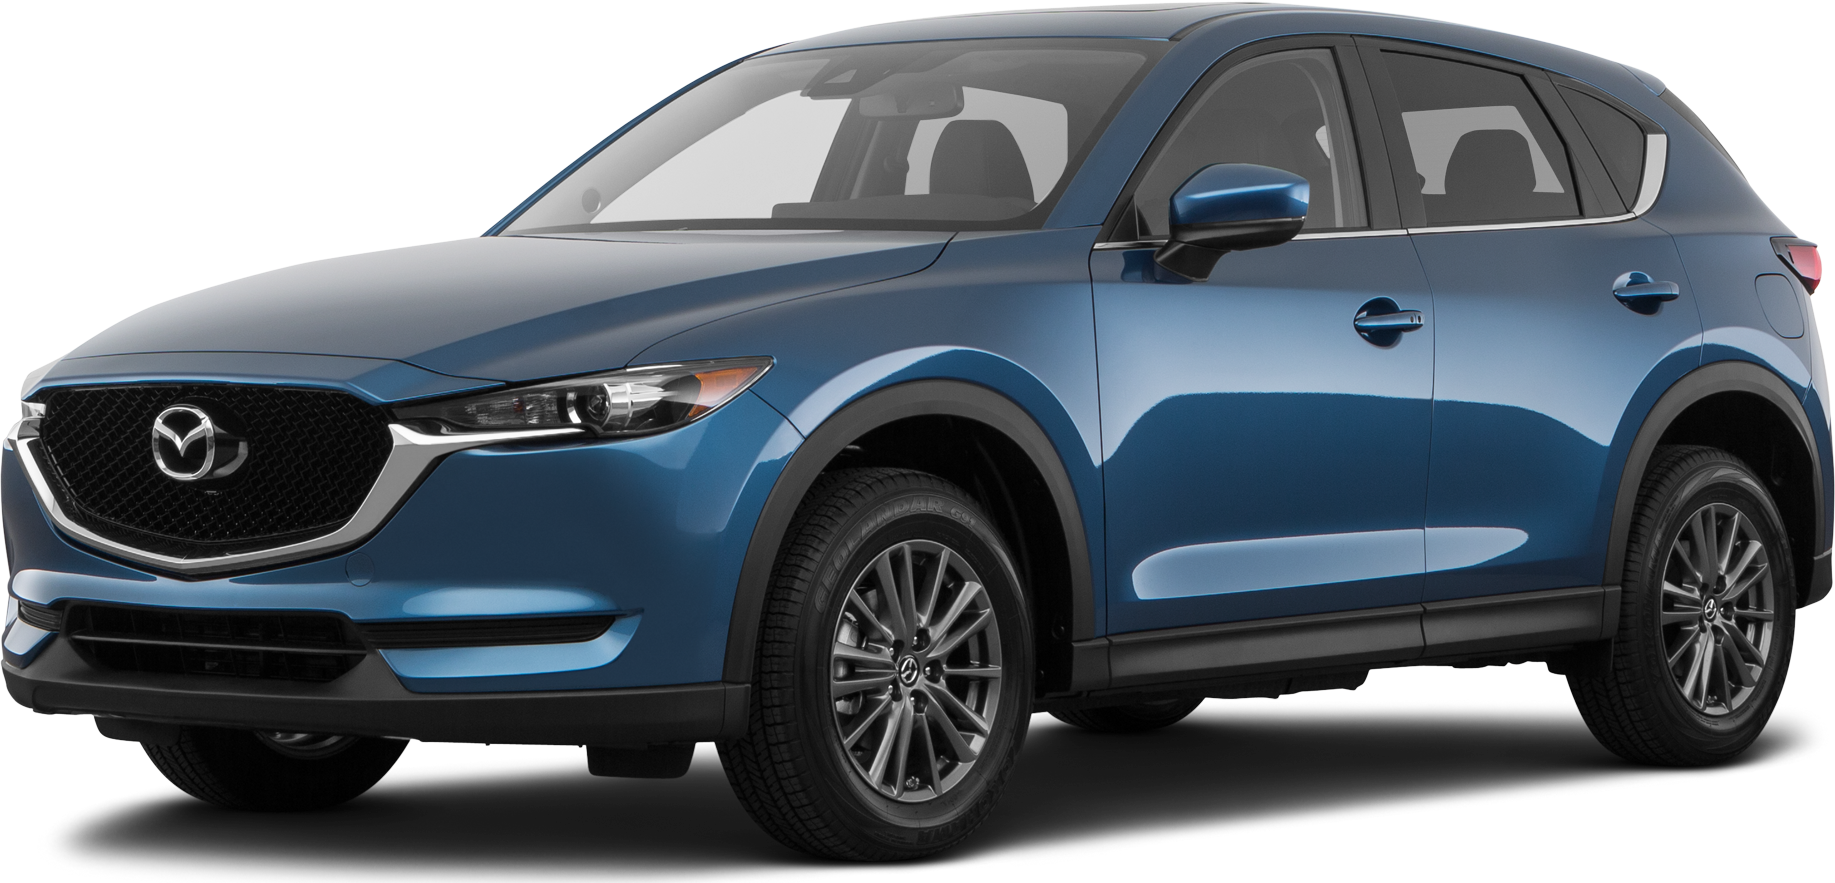 2017 Mazda Cx 5 Values And Cars For Sale Kelley Blue Book